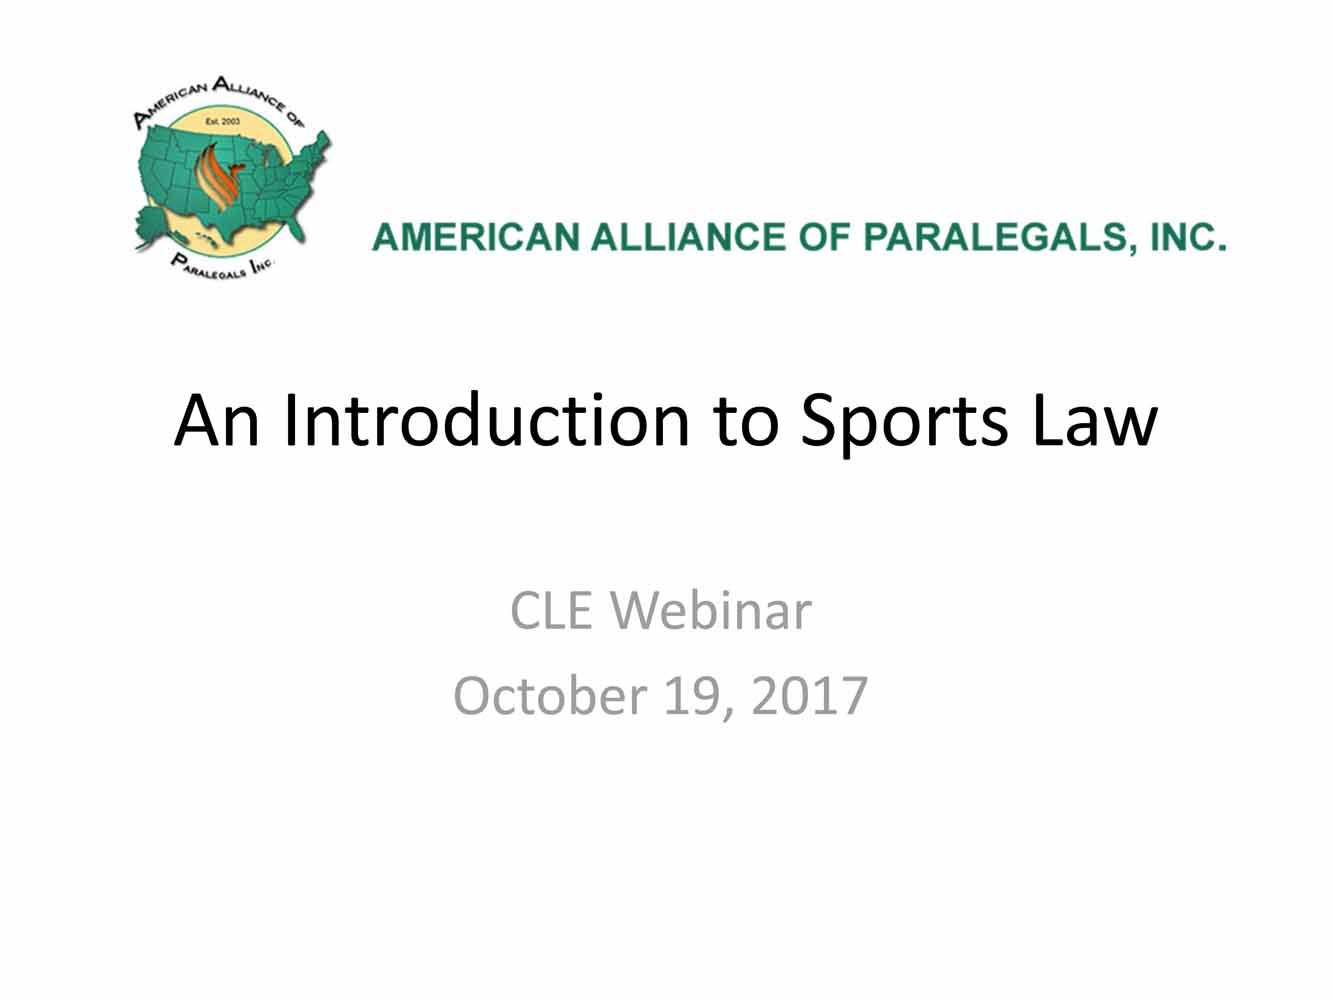 Introduction to Sports Law - Martin J. Greenberg - Sports Attorney